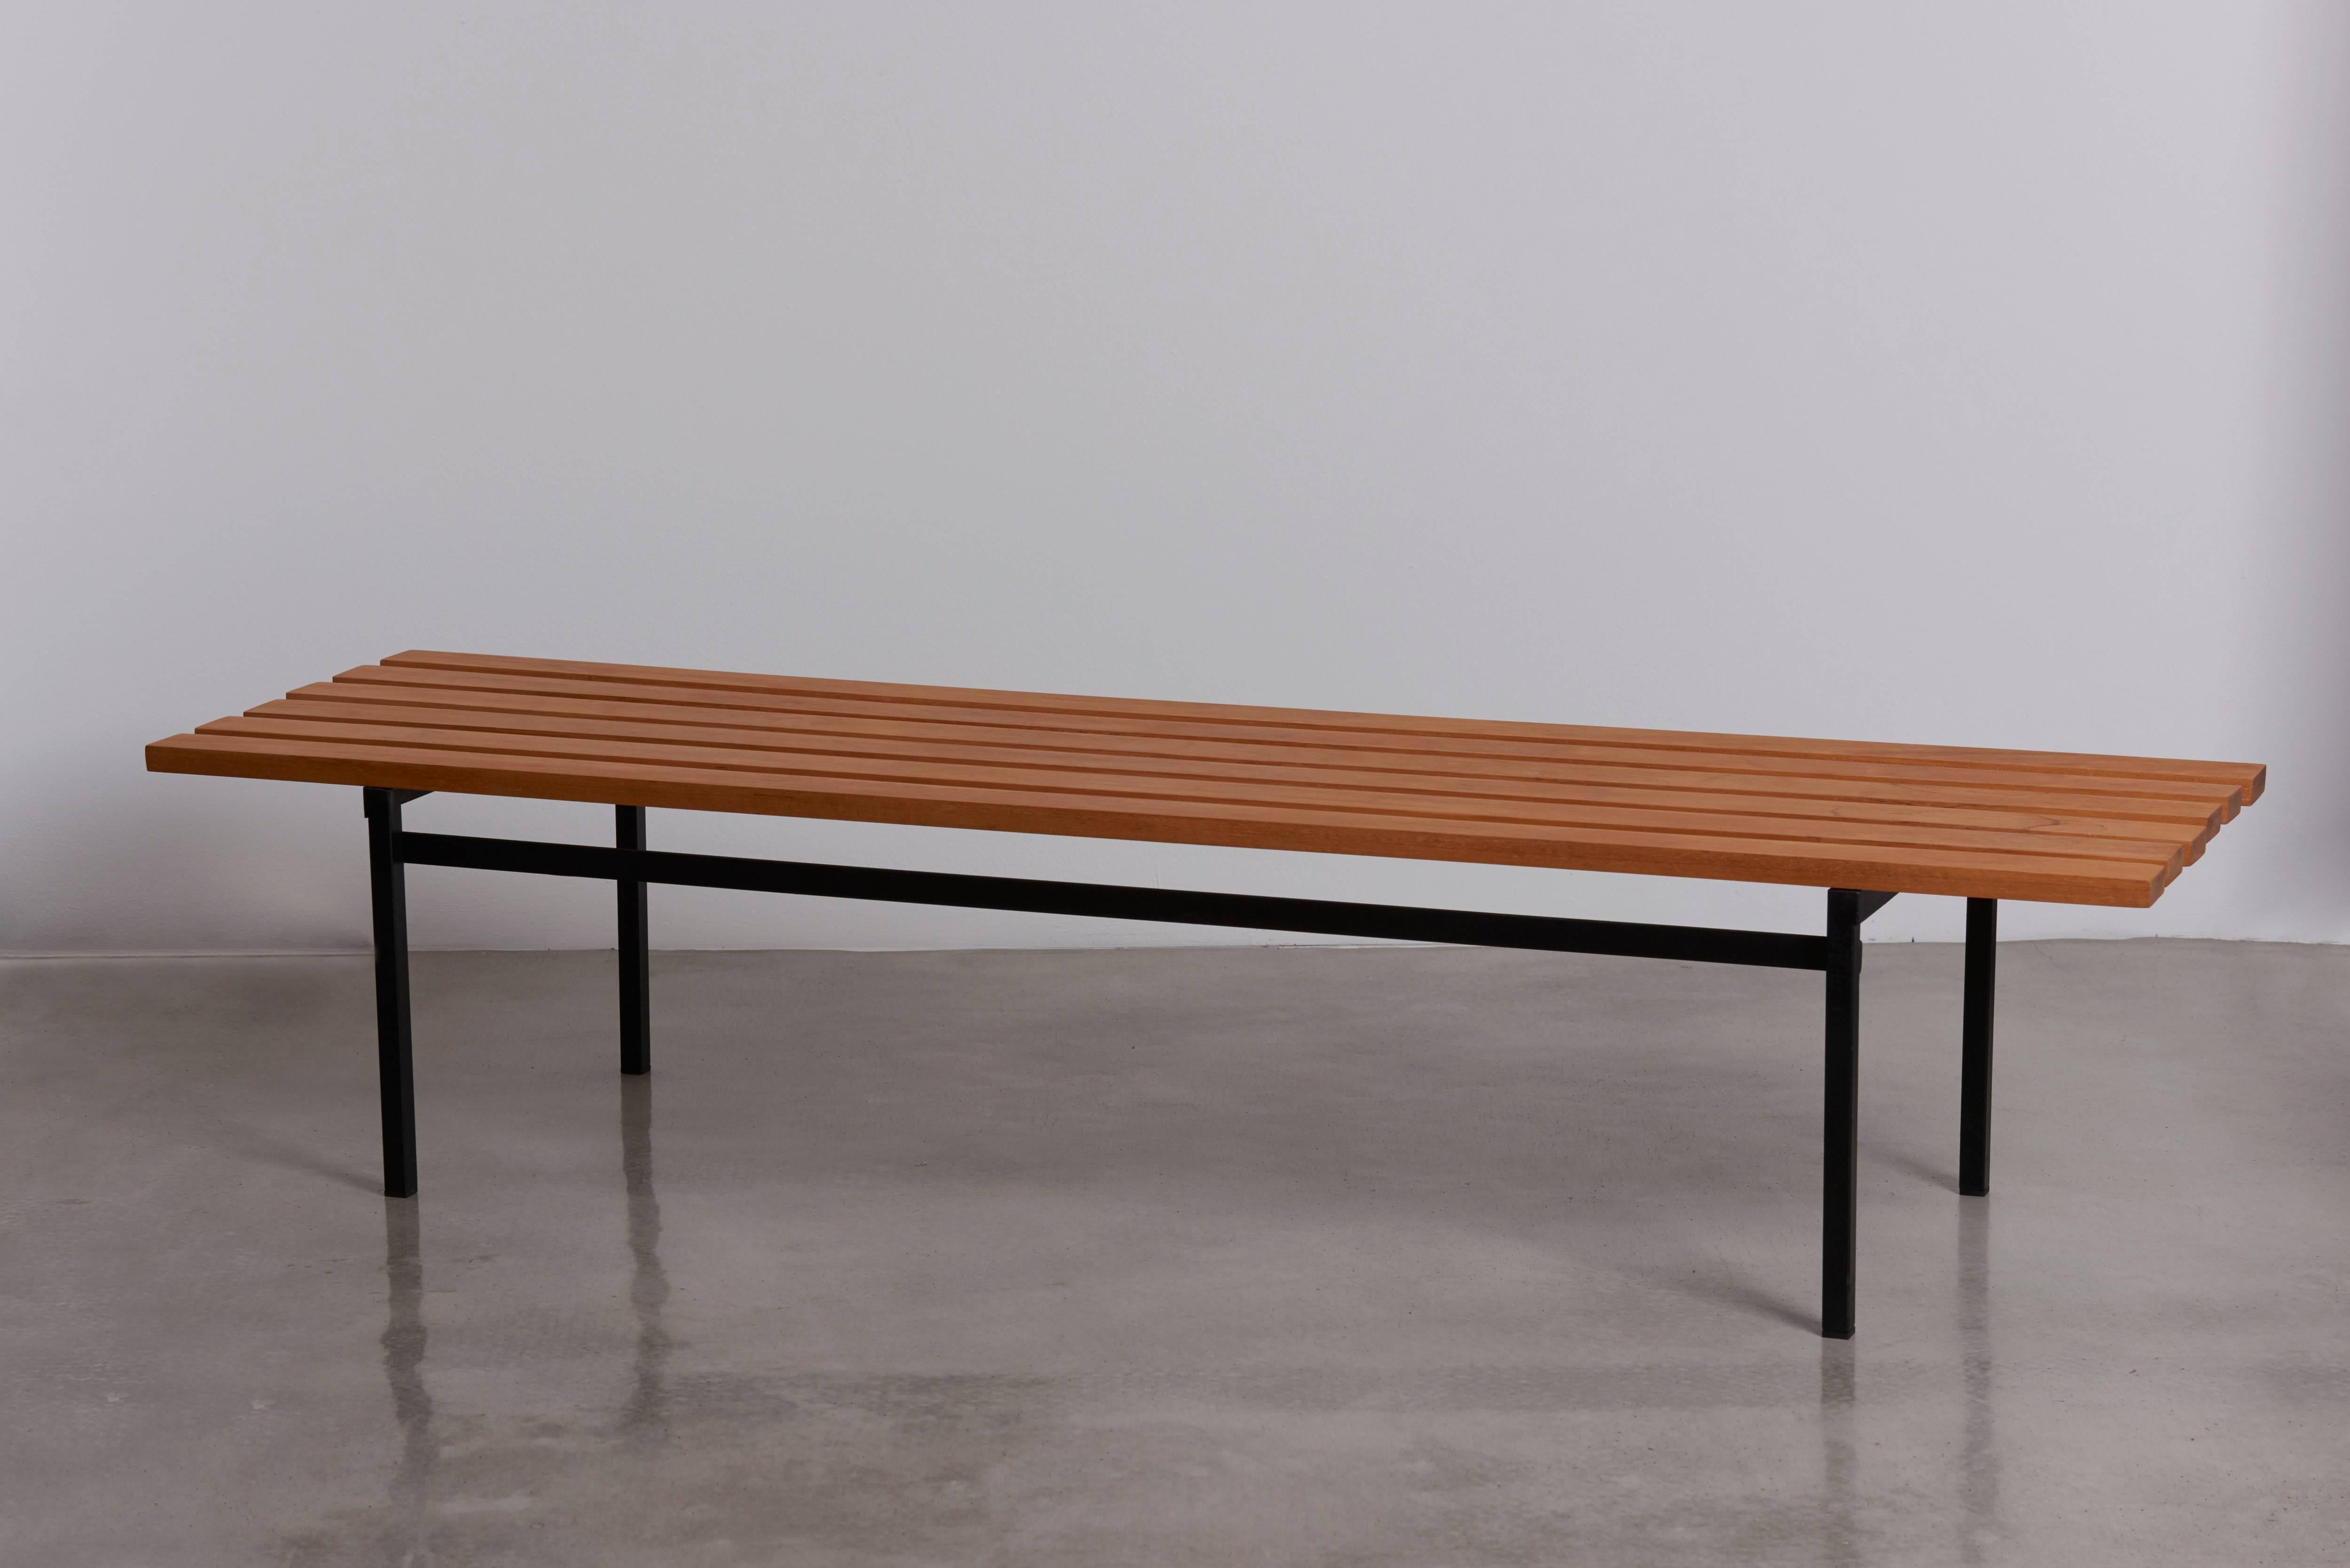 Teak bench by Hans Könecke for Tecta in very good condition. A German design classic.

